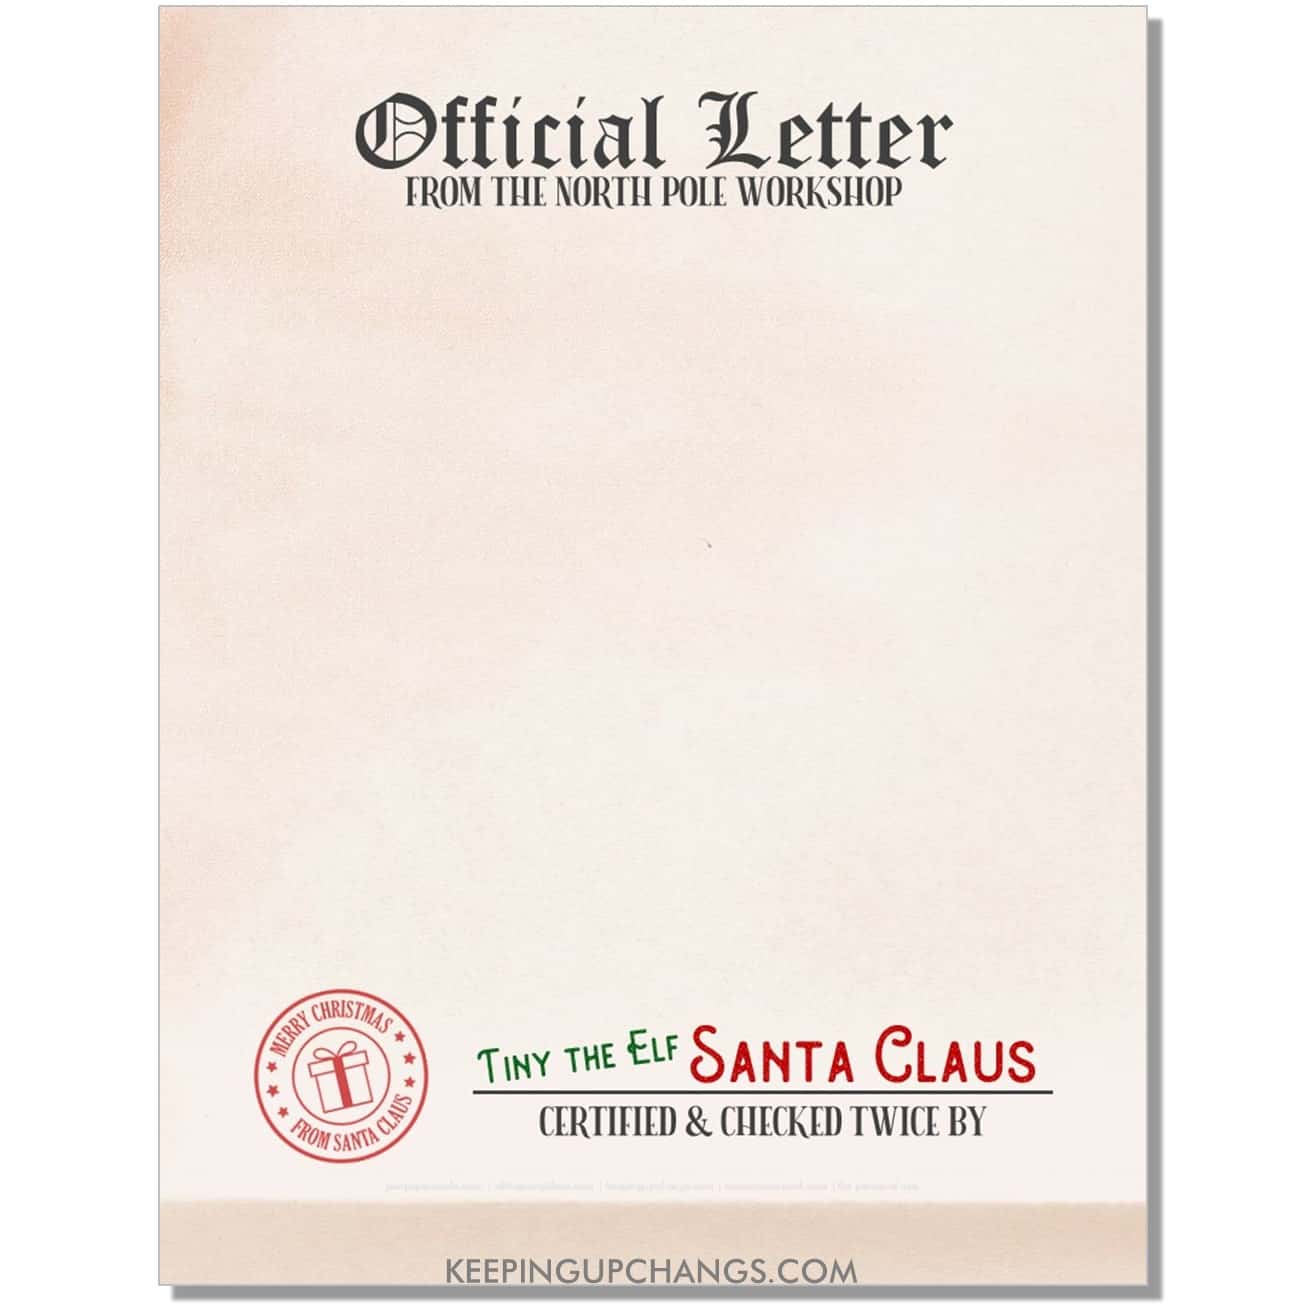 free official north pole santa letterhead blank template with stamp and seal.